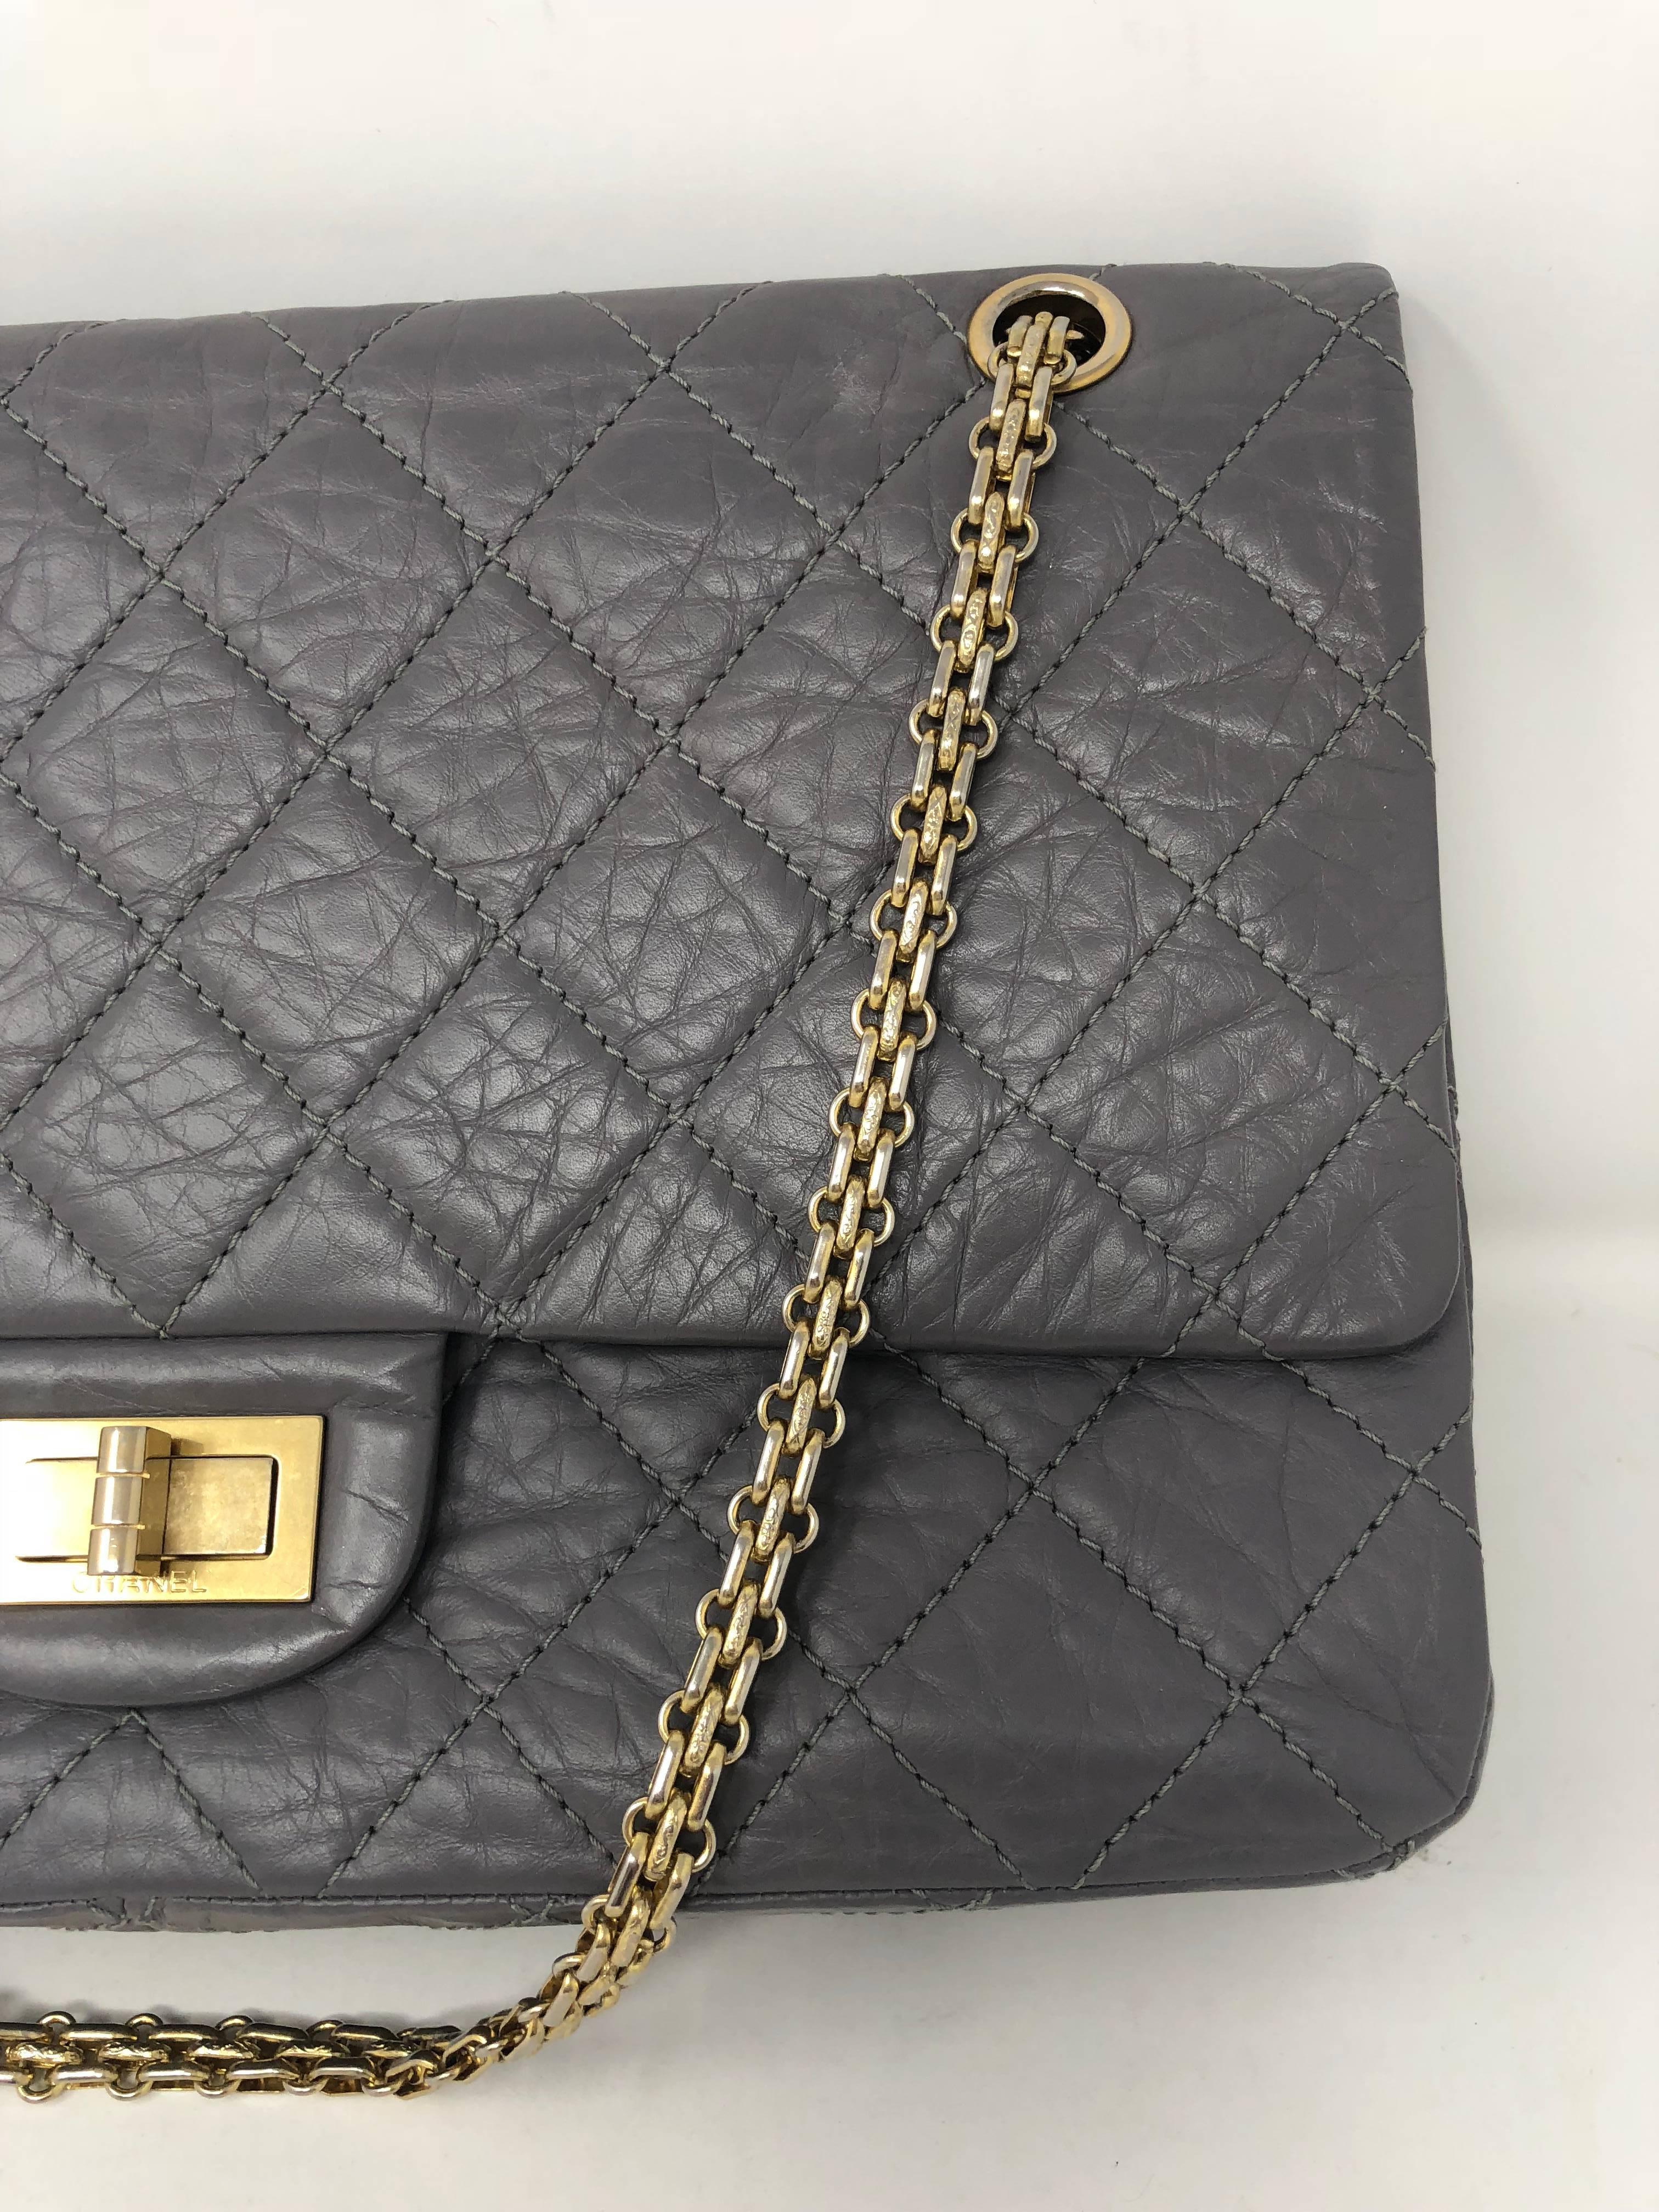 Chanel Gray Reissue Aged Calfskin distressed leather 2.55 double flap. Features a gold chain shoulder strap that can be worn doubled as a shoulder bag or as a crossbody. Gold Mademoiselle squared turn lock. The leather is crafted with aged calfskin